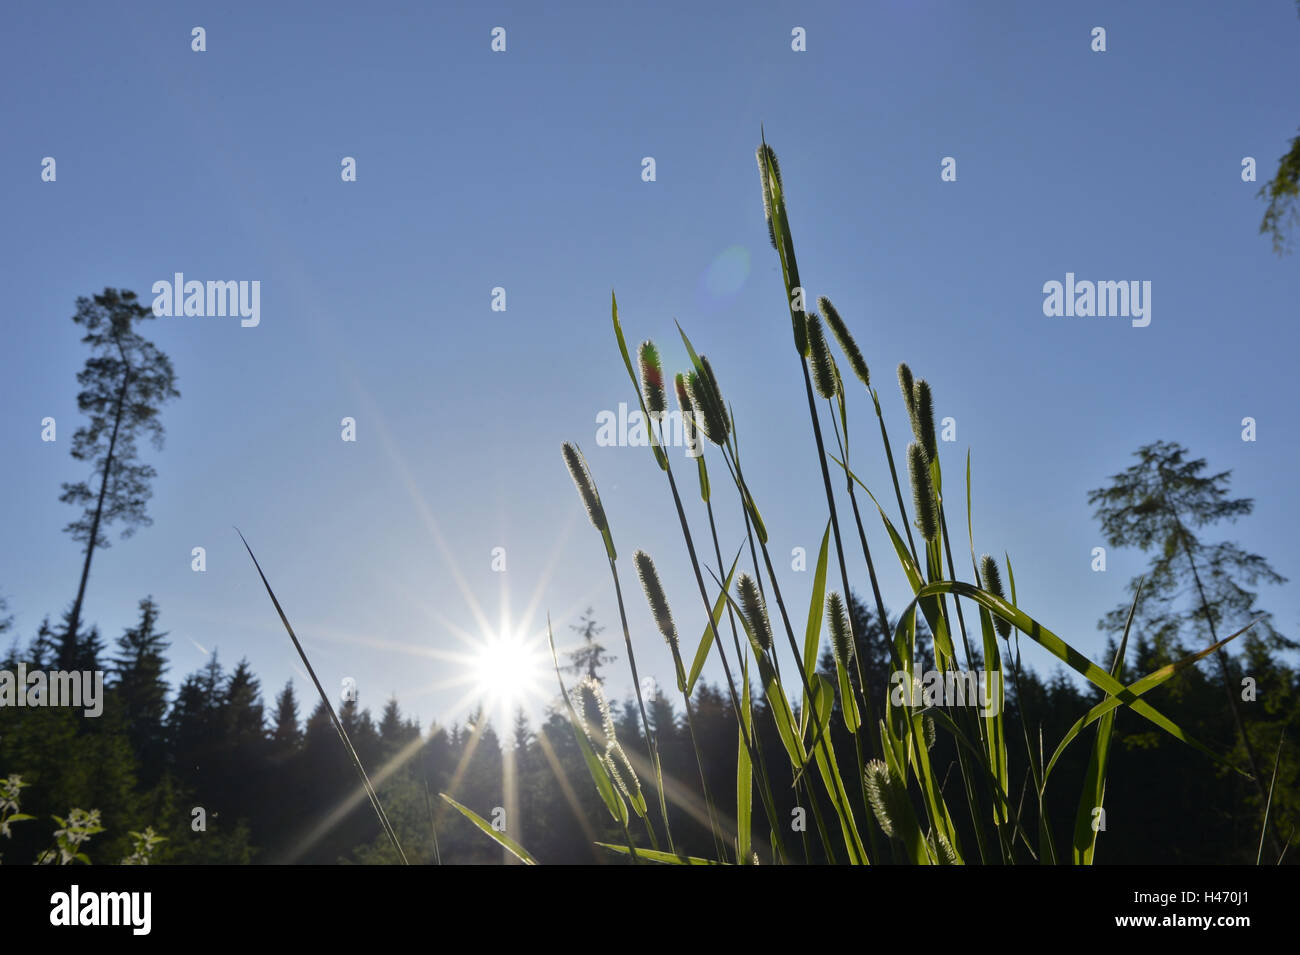 Meadow foxtail, Alopecurus pratensis, landscape, backlight, Stock Photo